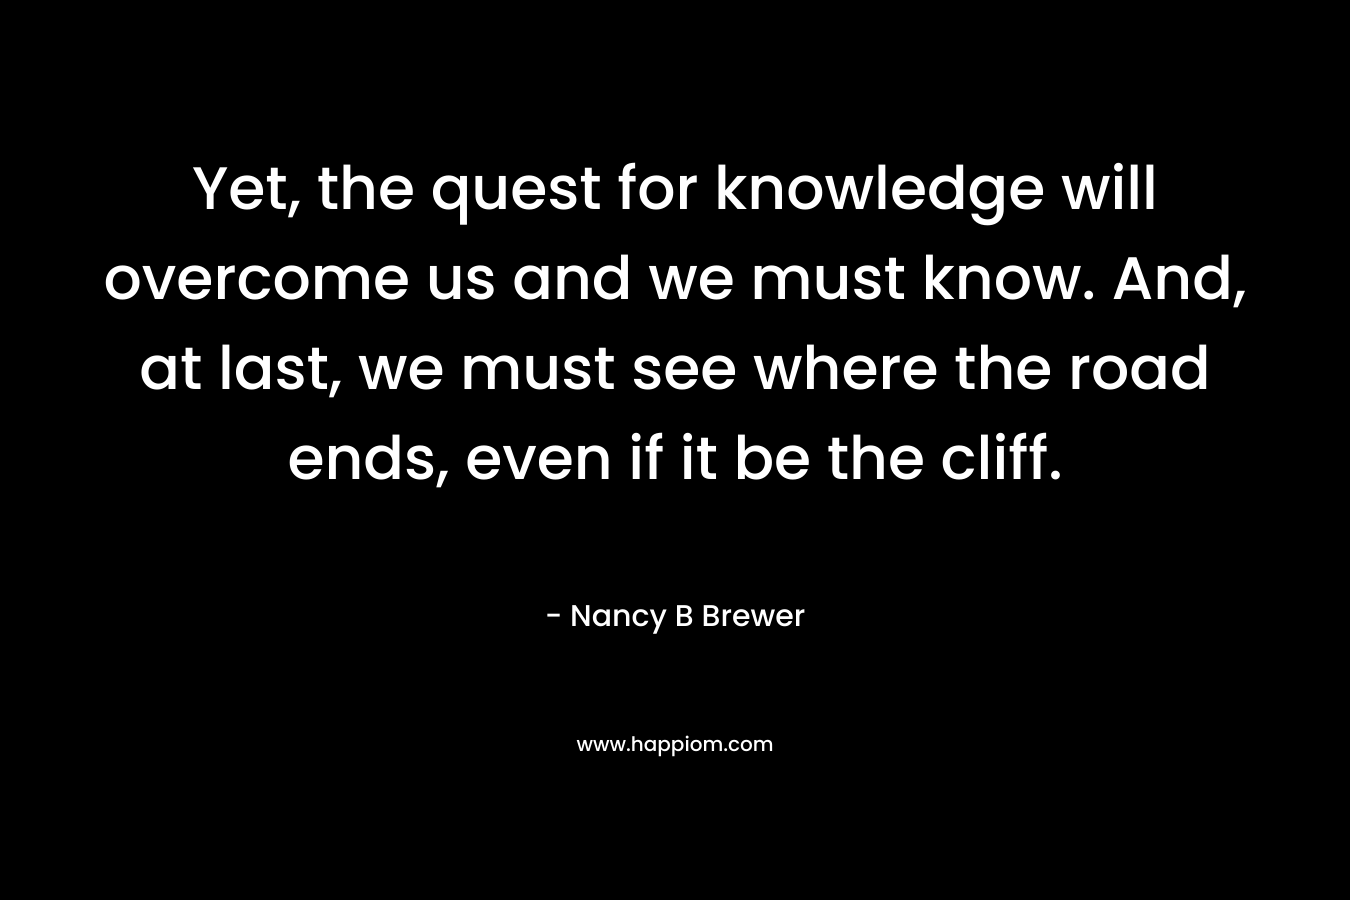 Yet, the quest for knowledge will overcome us and we must know. And, at last, we must see where the road ends, even if it be the cliff.